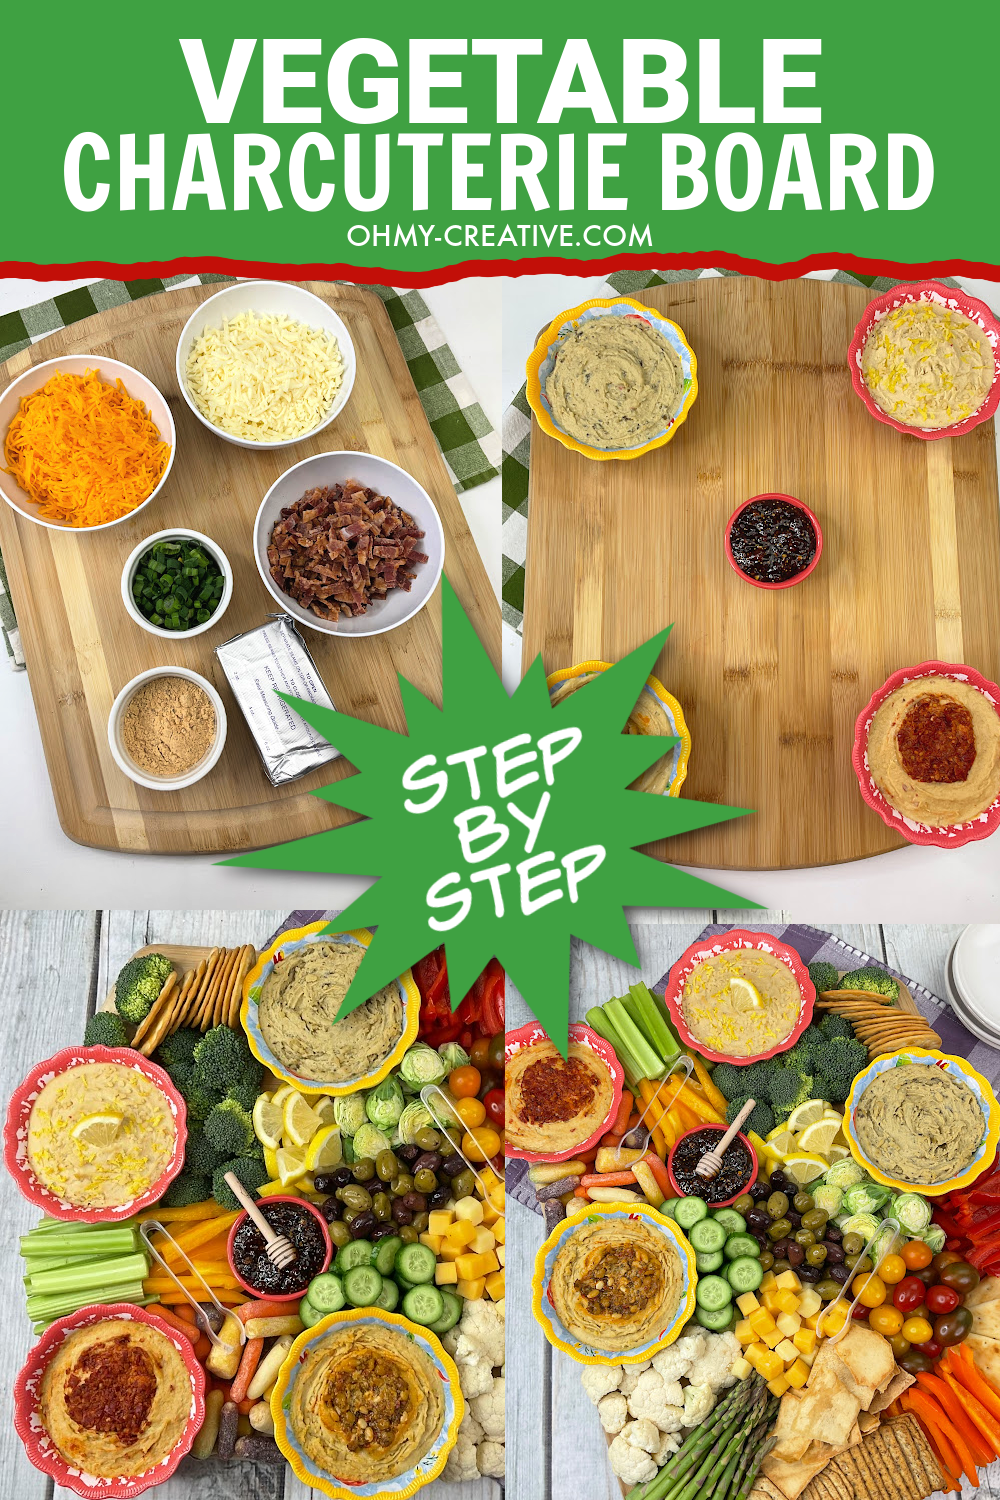 A healthy vegetable veggie charcuterie board with step by step instructions for assembling the charcuterie board.